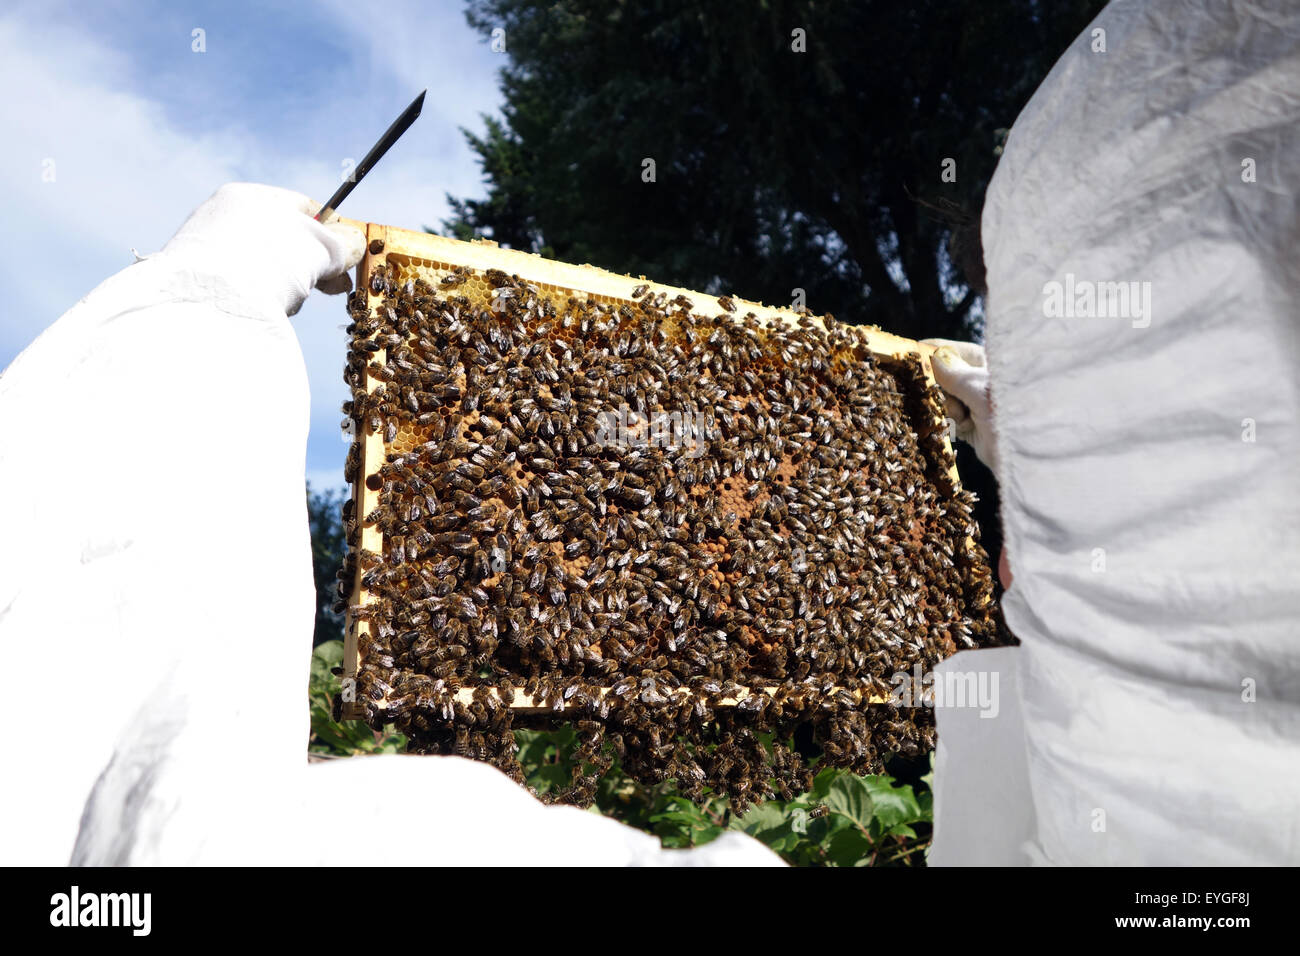 Berlin, Germany, beekeeper inspects a honeycomb of his bee colony Stock Photo